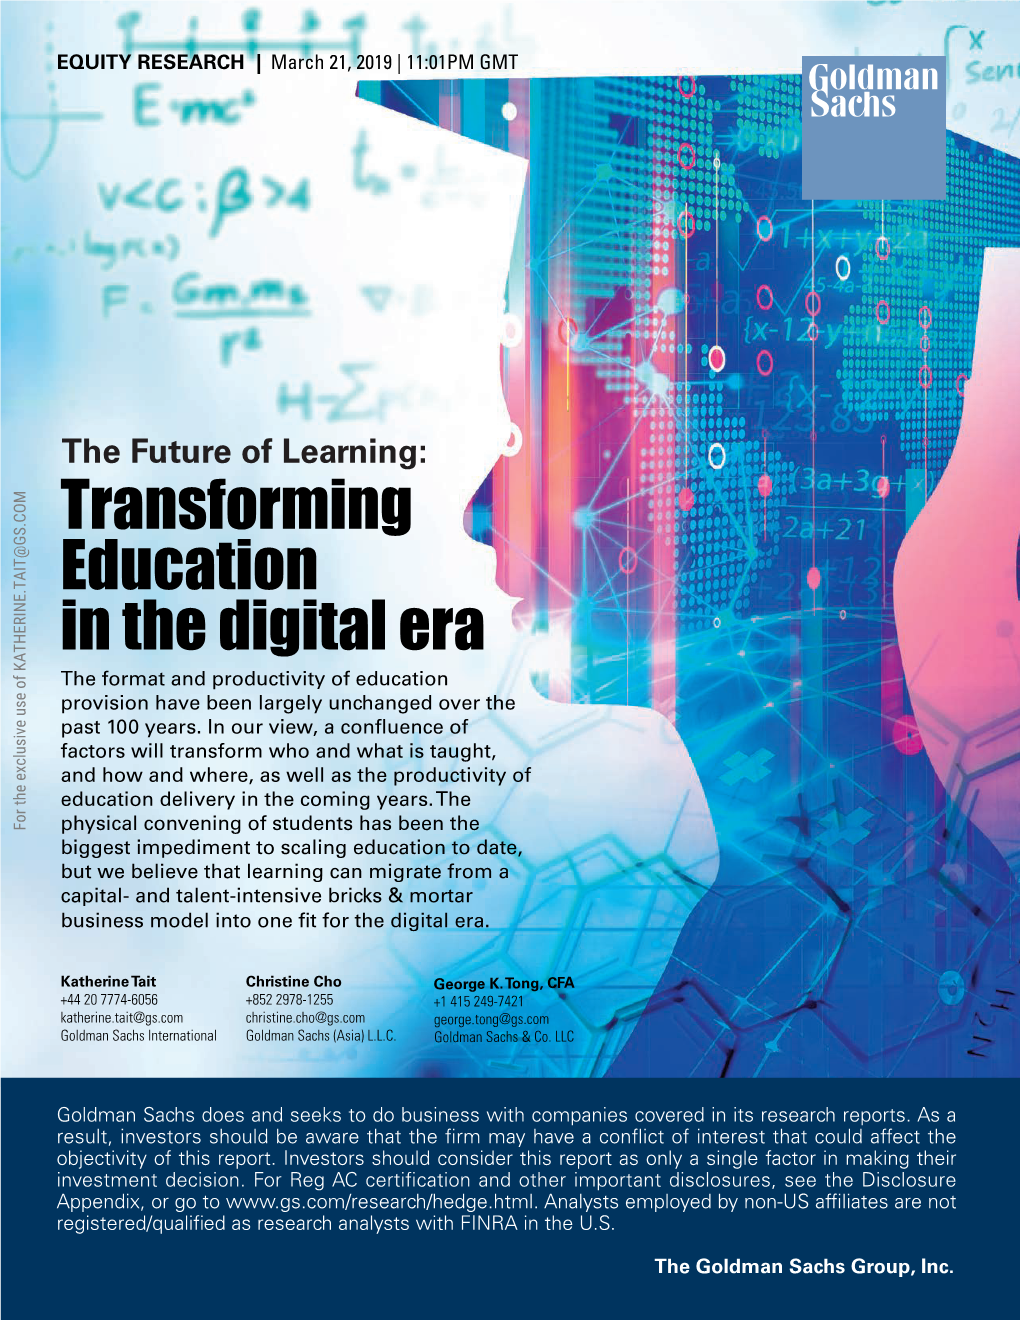 The Future of Learning Transforming Education in the Digital